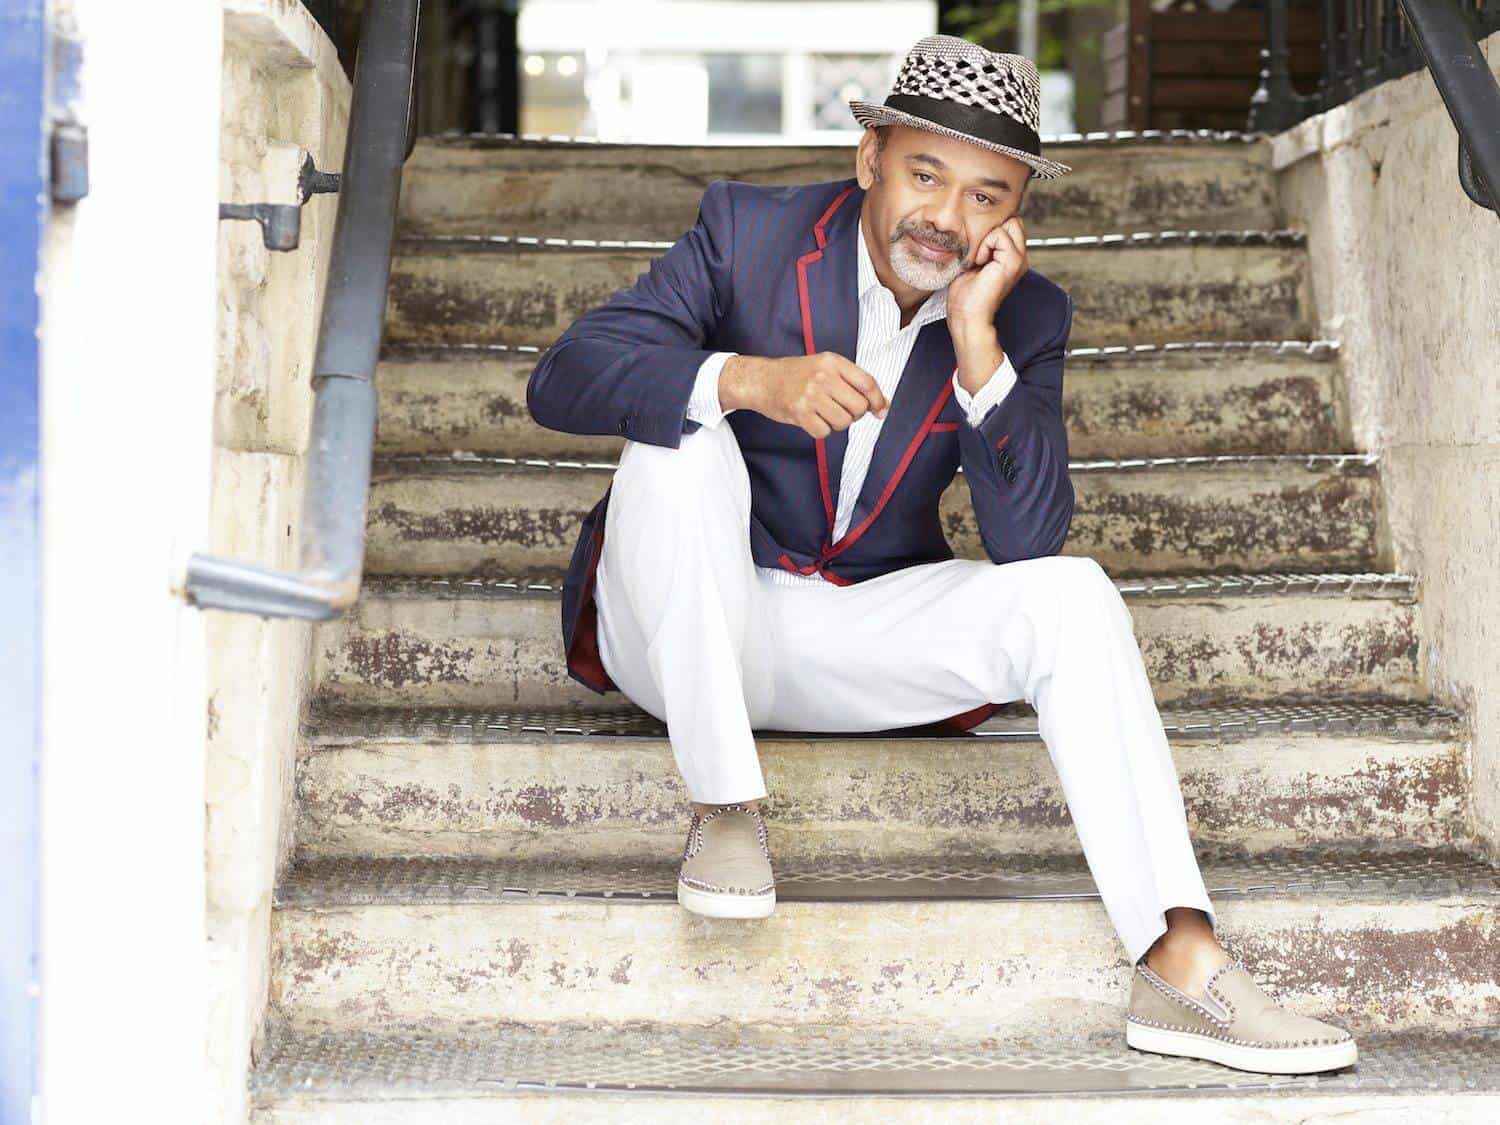 Christian Louboutin - towering heights of stiletto success